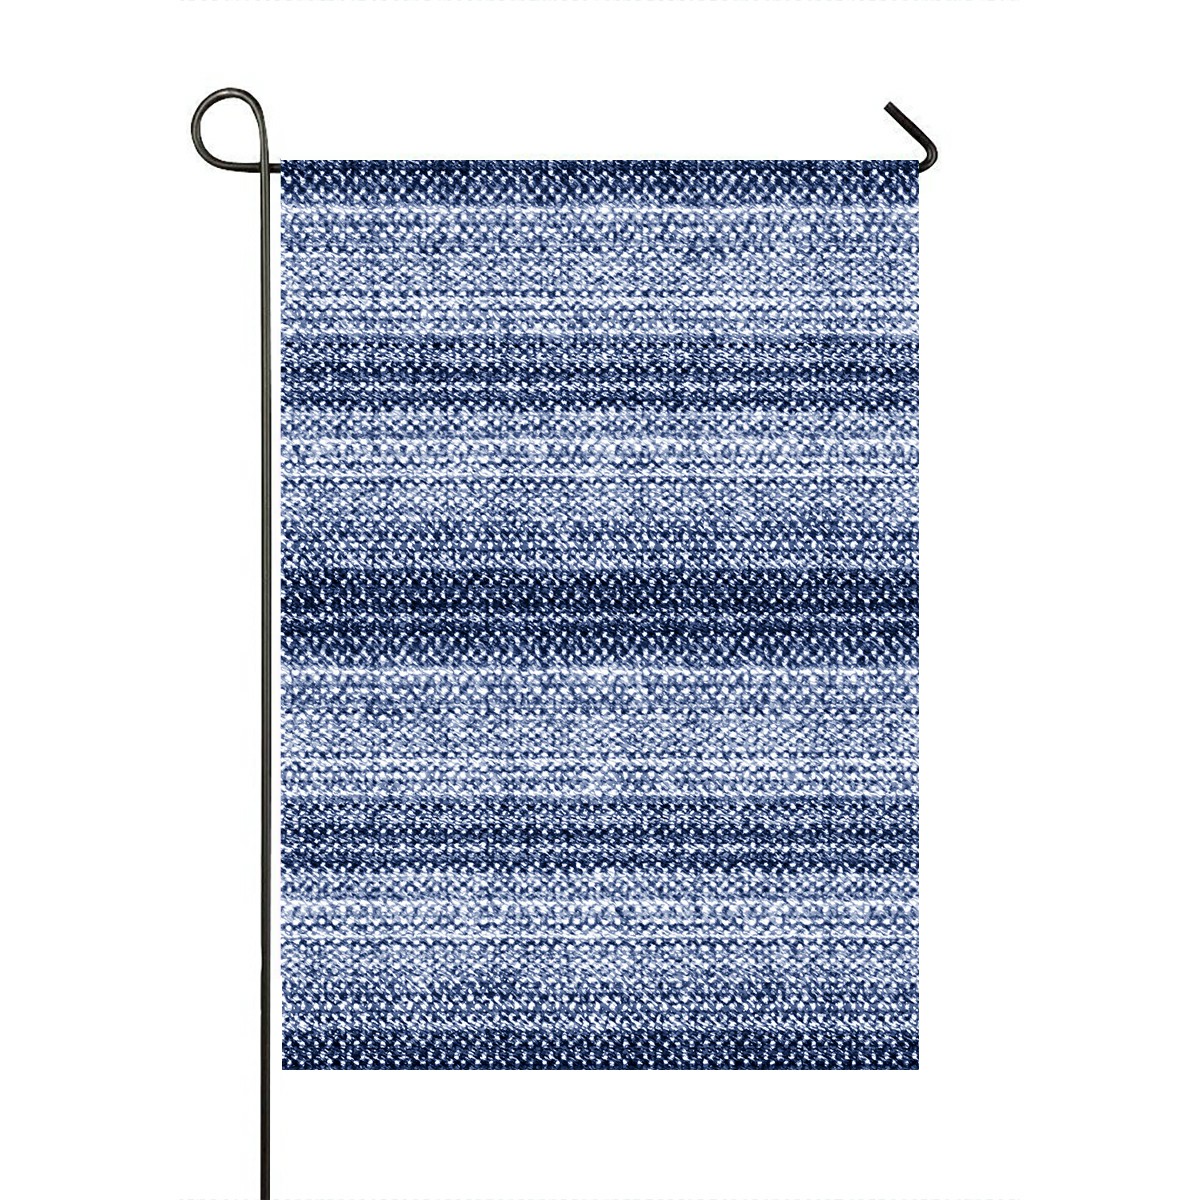 ABPHQTO Brushed Striped Motif Tweed Flecks Home Outdoor Garden Flag House Banner Size 28x40 Inch - image 1 of 1